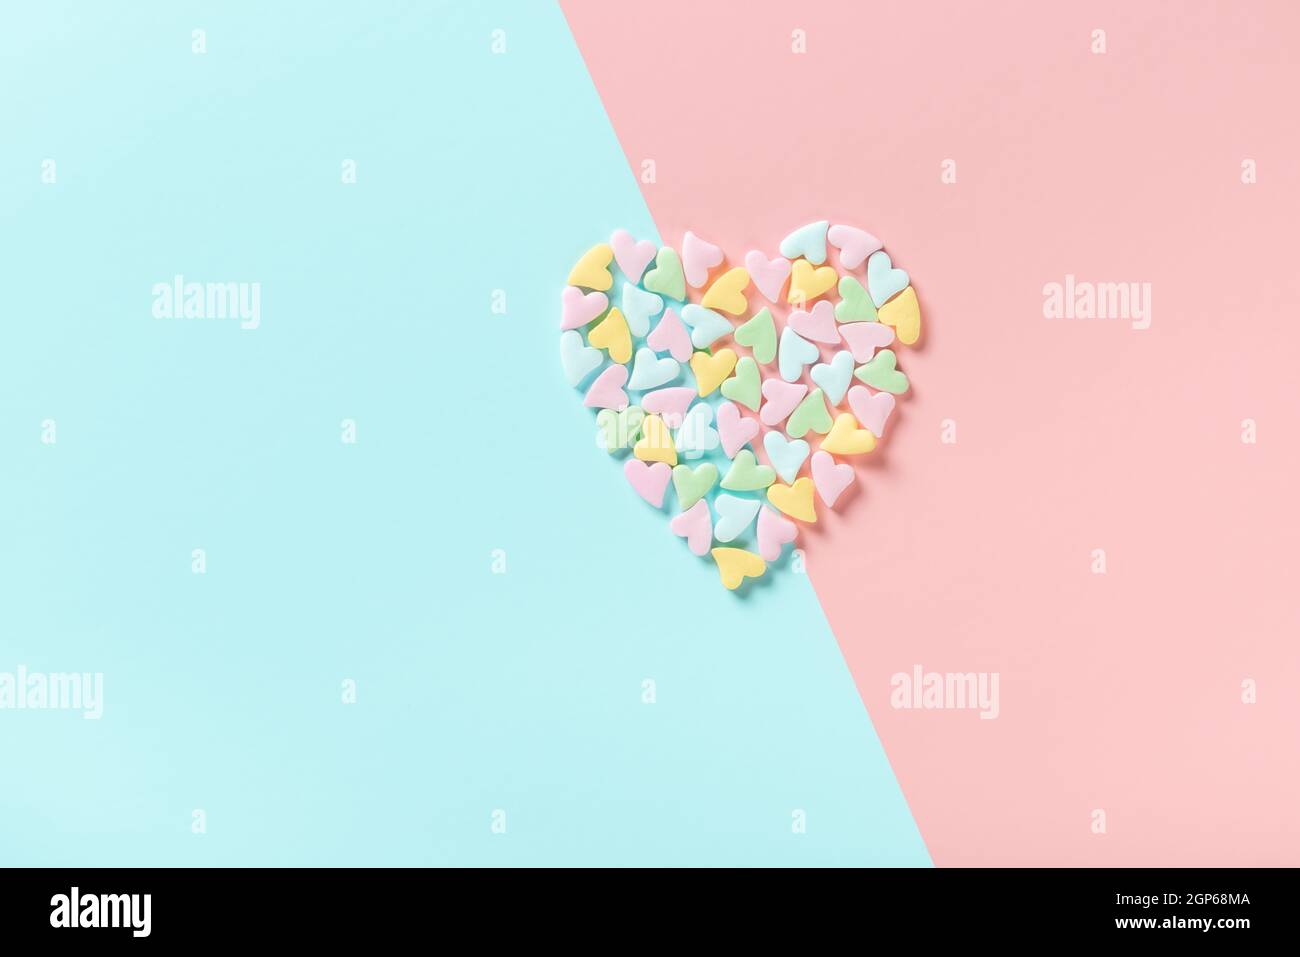 concept of Valentines day greeting with split heart shape from sprinkles over pink and blue background Stock Photo